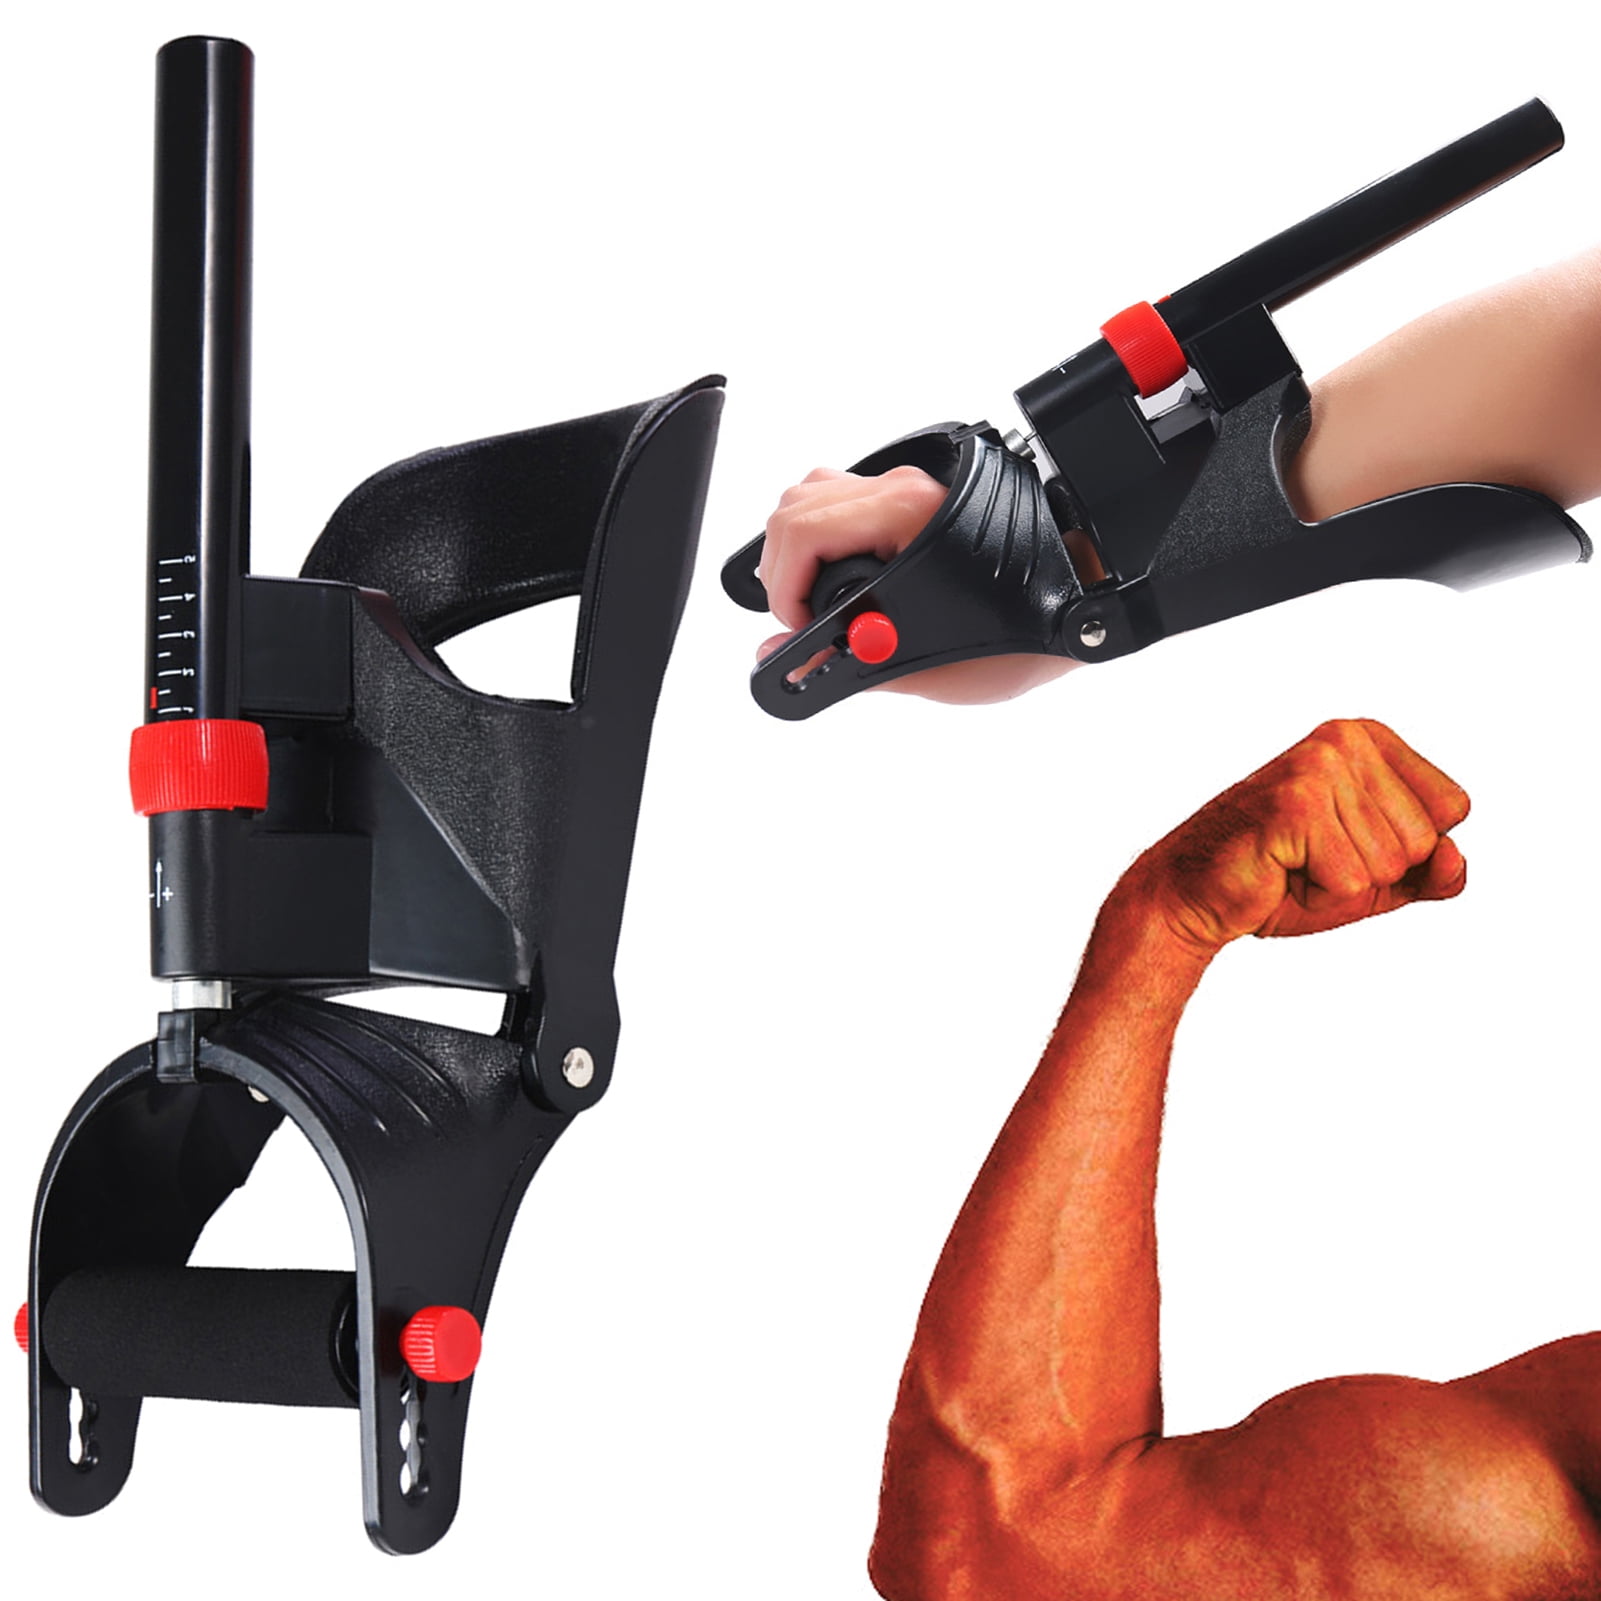 Walbest Wrist and Forearm Developer Wrist Strength Training Exercise  Machine, Adjustable Gears Forearm Grip Hand Gripper Exerciser Arm  Machines Exercise Muscle